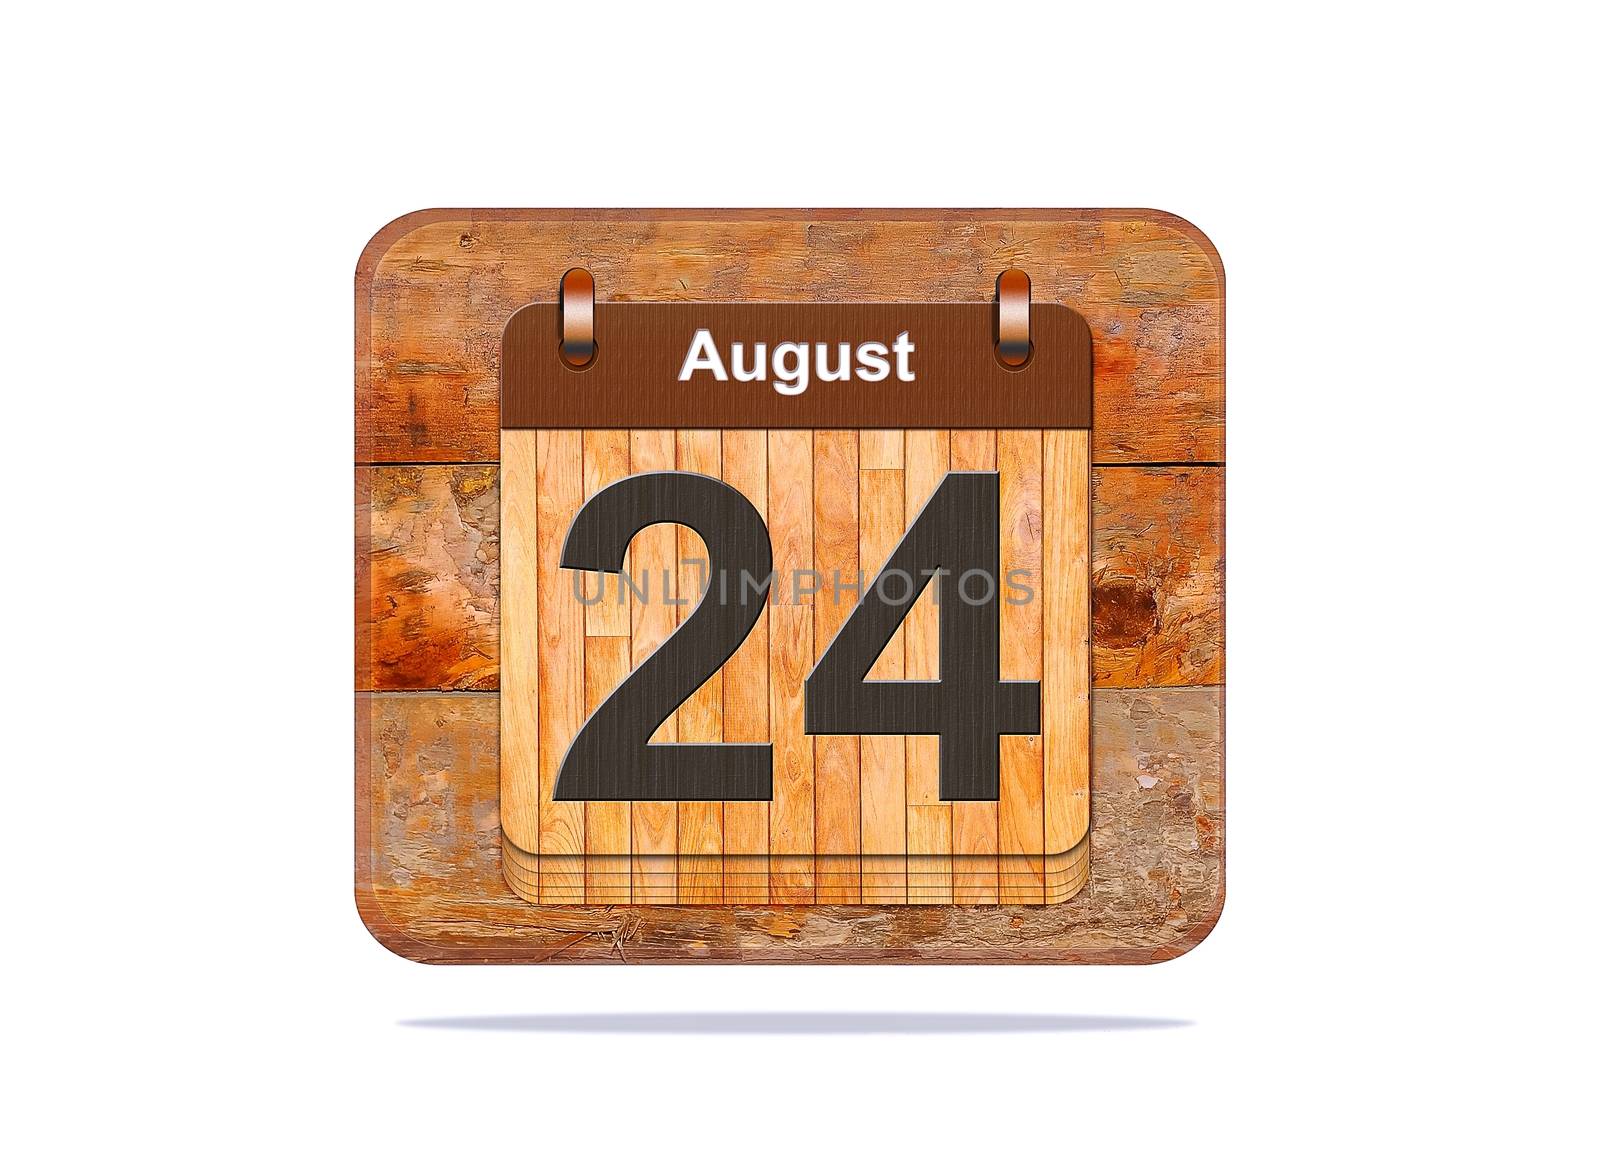 Calendar with the date of August 24.